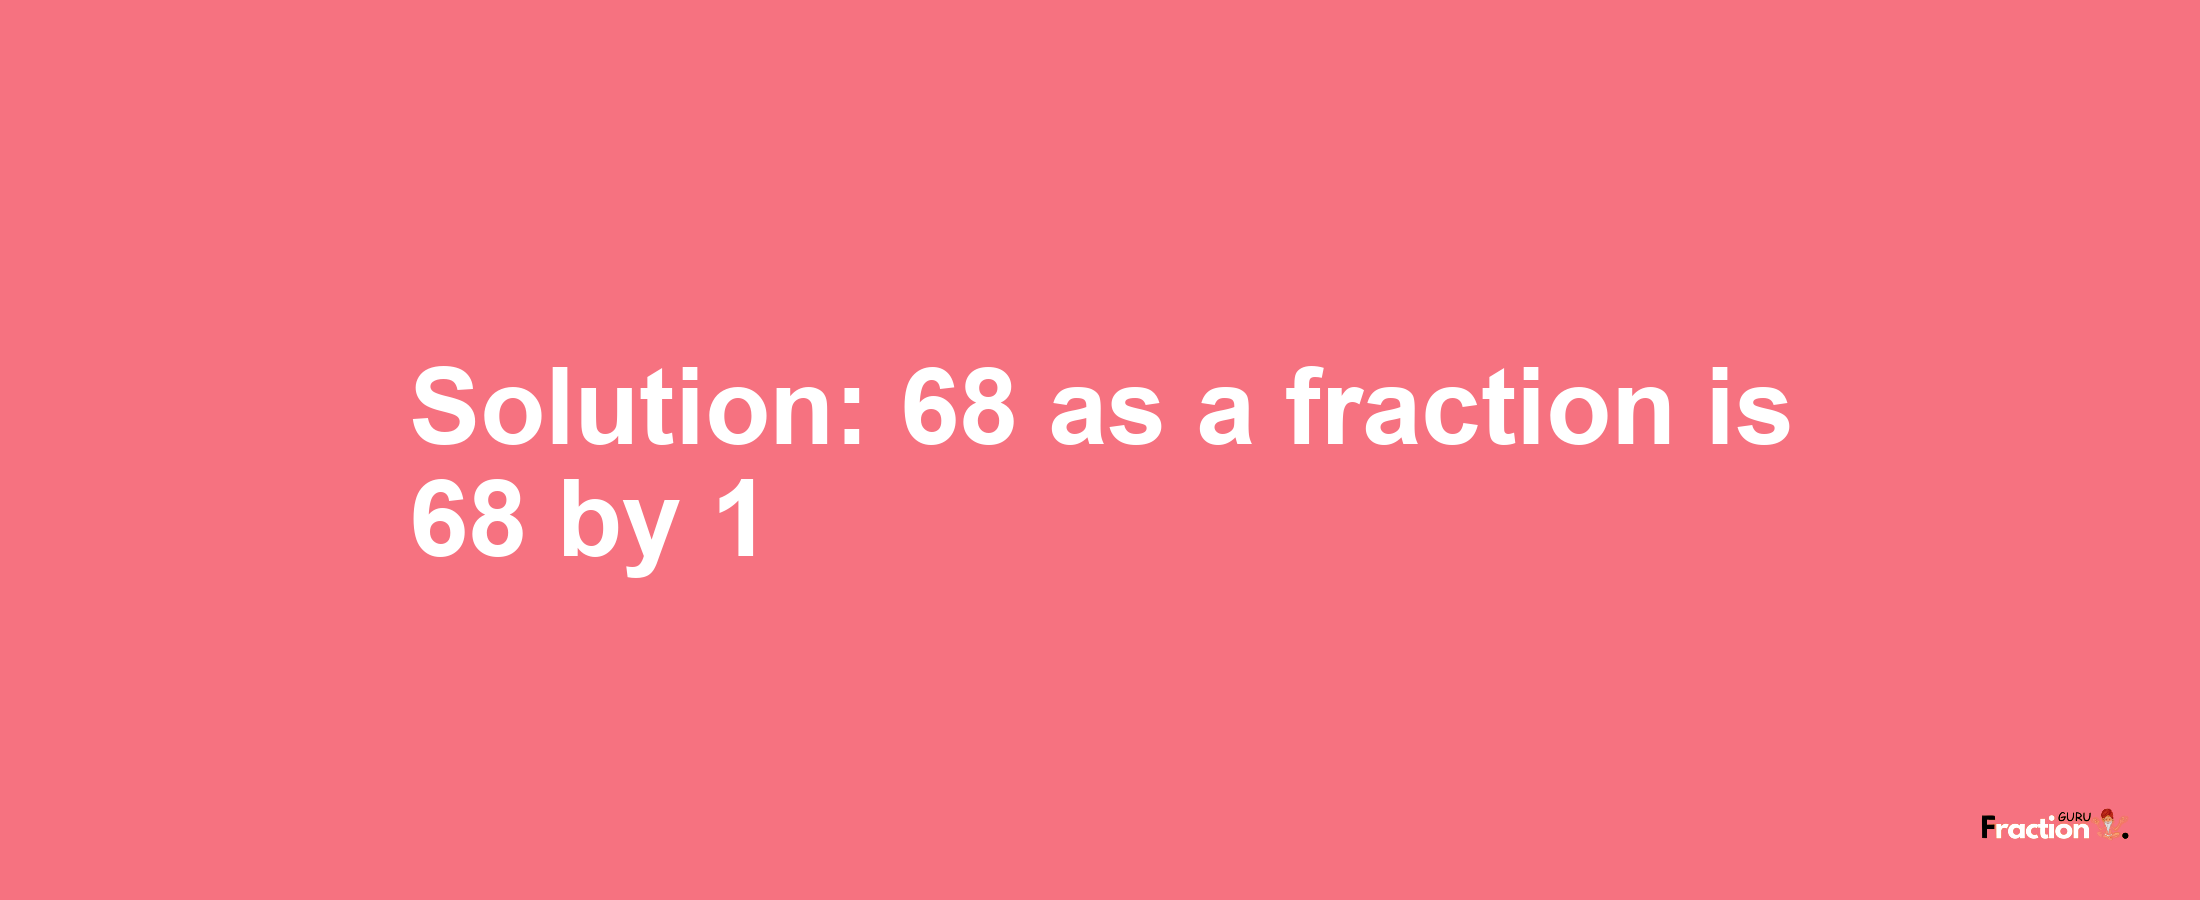 Solution:68 as a fraction is 68/1